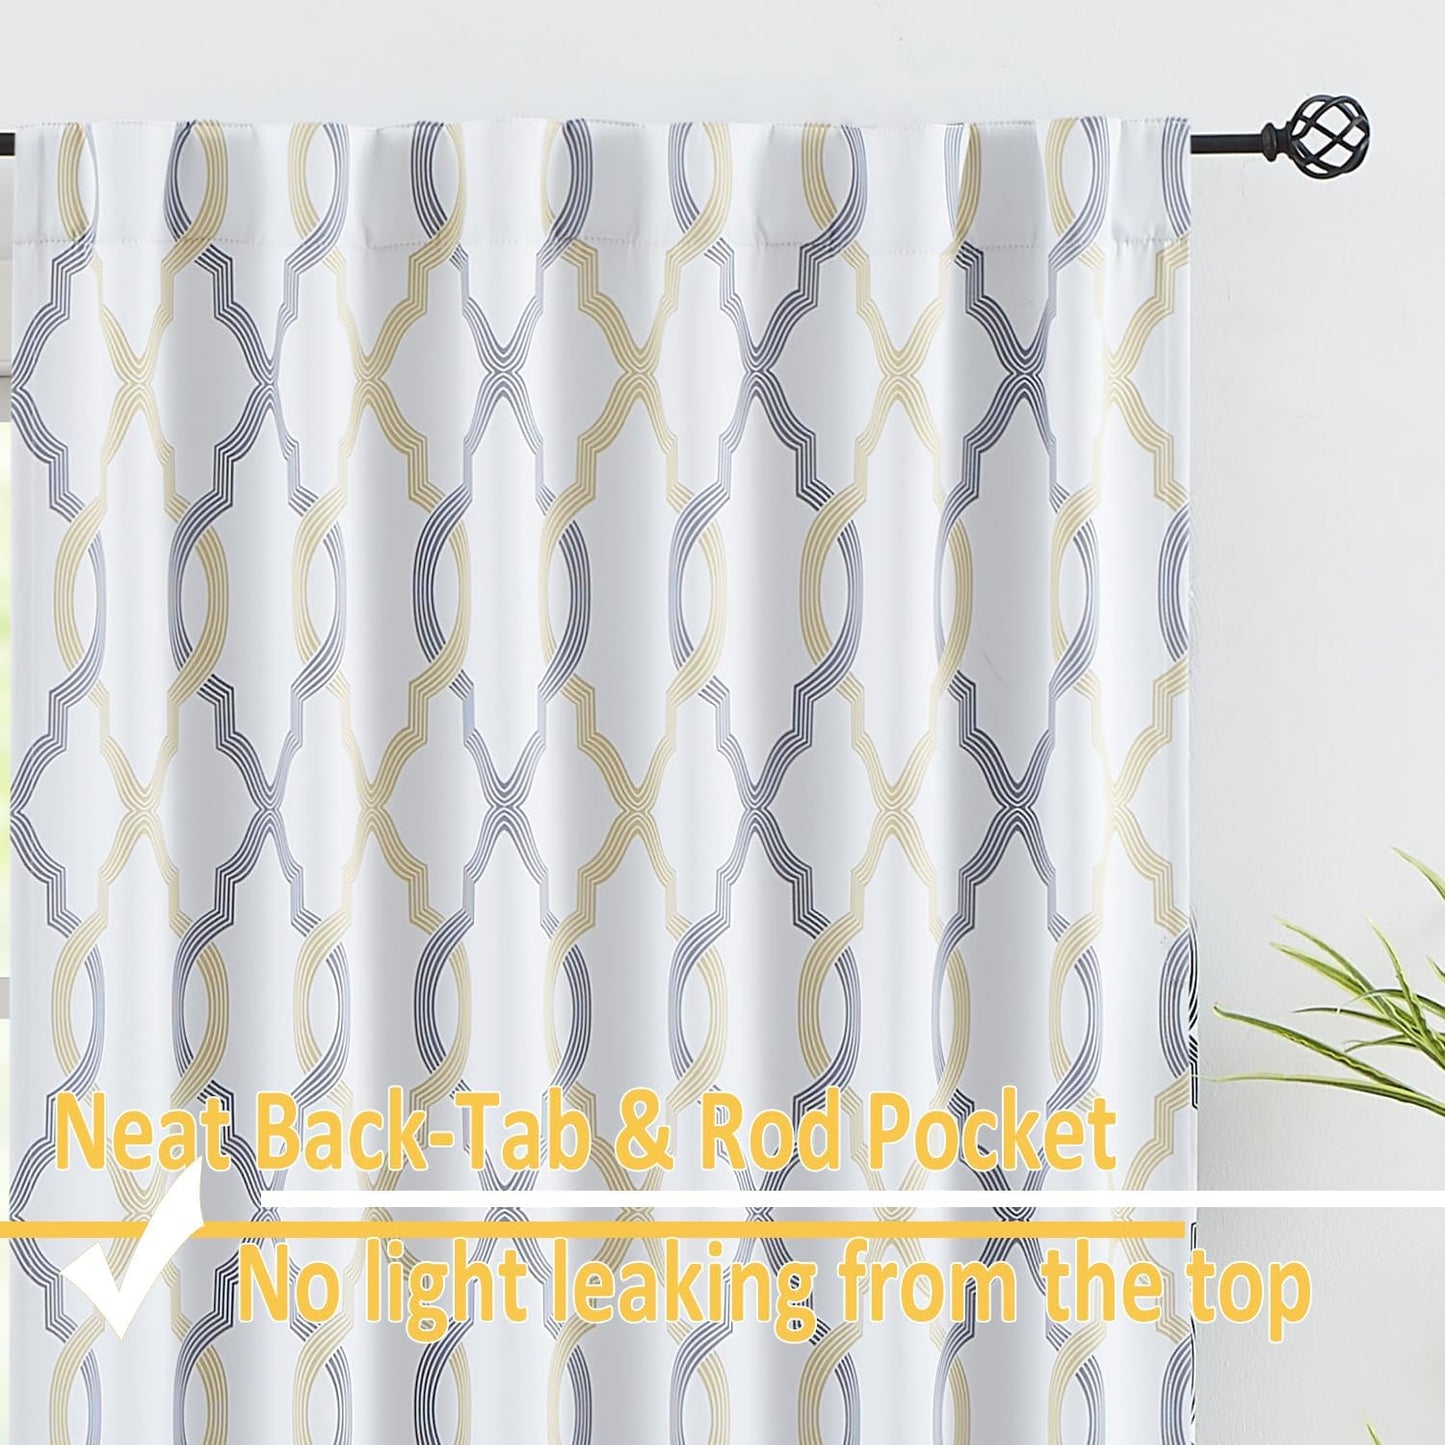 Yellow Grey Moroccan Tile Full Blackout Curtains for Bedroom Living Room, Energy Saving Geo Contrast Lattice Printed Pattern Window Treatment Set for Kitchen Dining, Rod Pocket/ Back Tab 50X63 2Pcs  Fmfunctex   